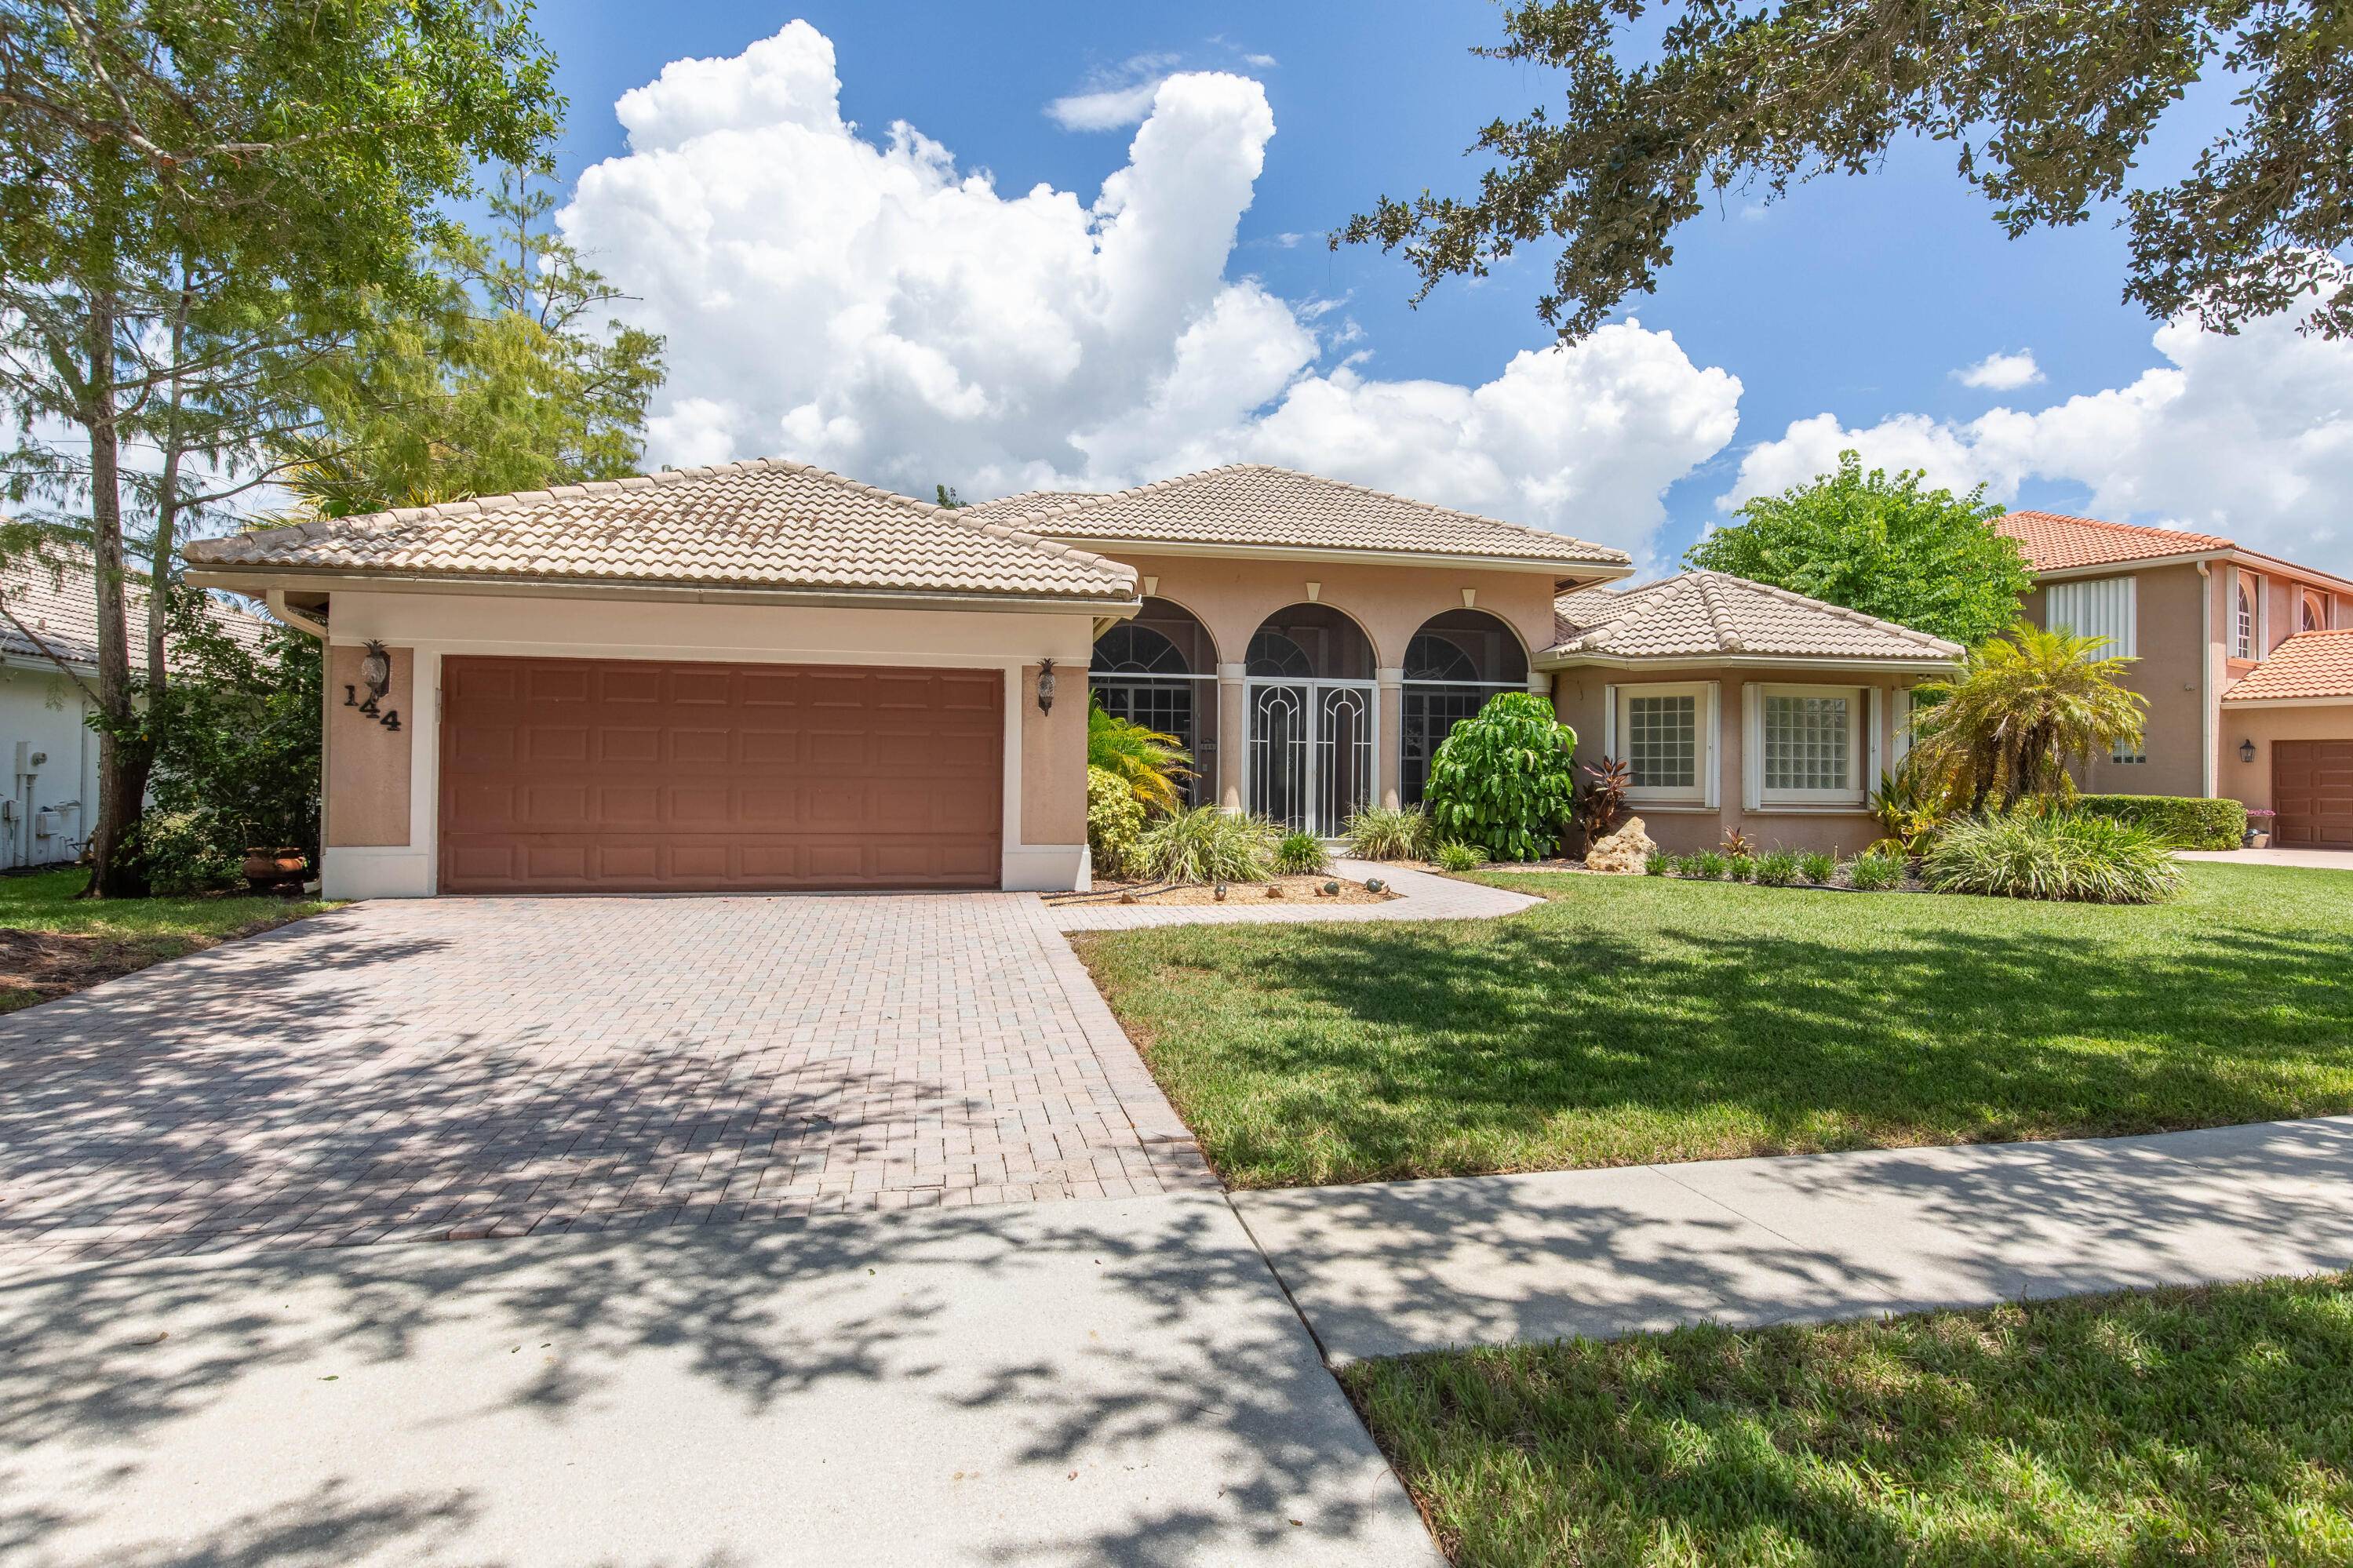 This fantastic 4 bedroom plus office and 3 bathroom home has a large screened patio with a pool and is situated on a perfect waterfront lot with beautiful vistas and ...